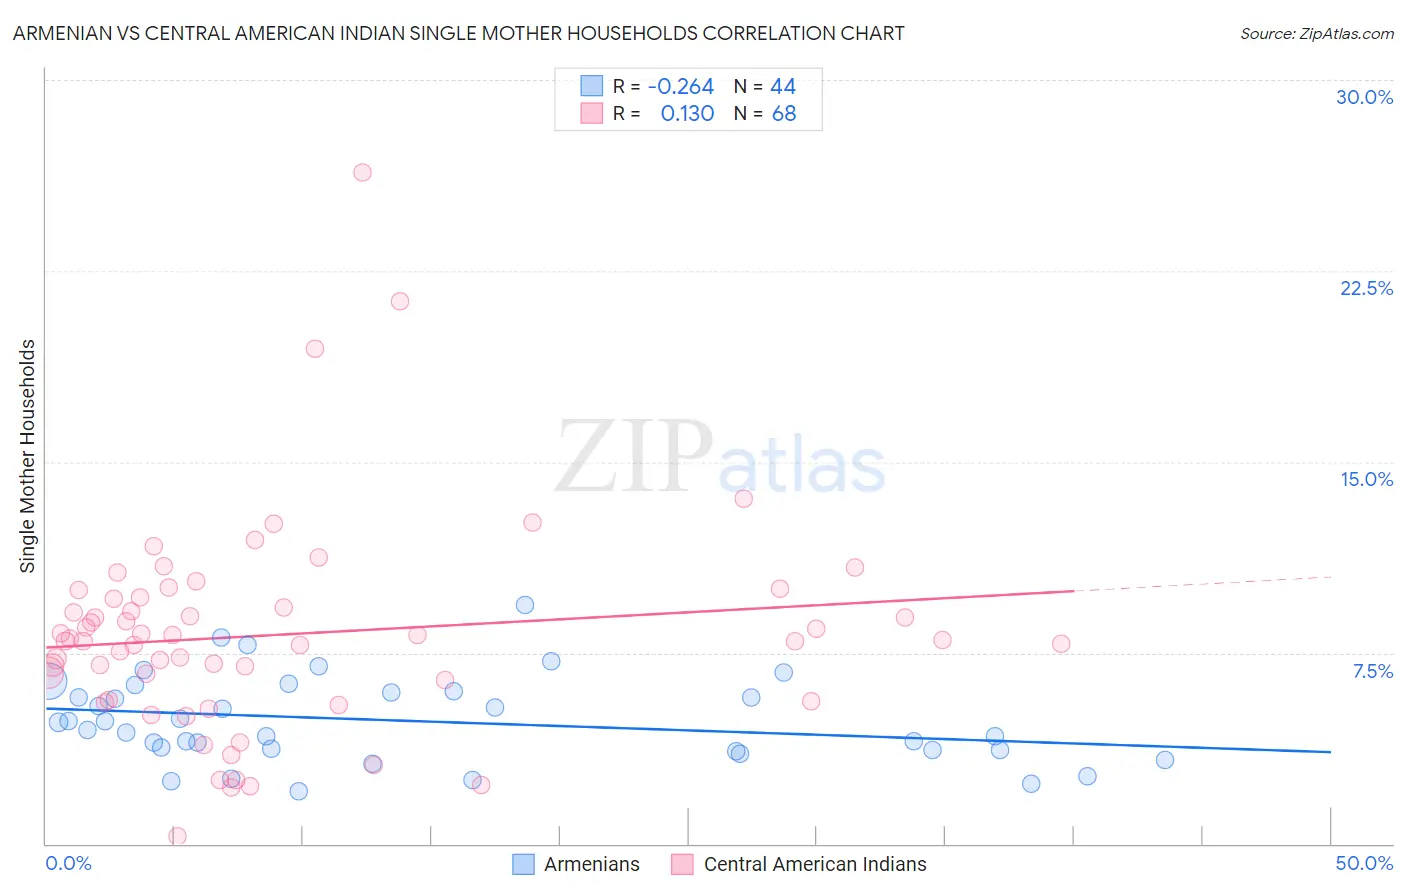 Armenian vs Central American Indian Single Mother Households